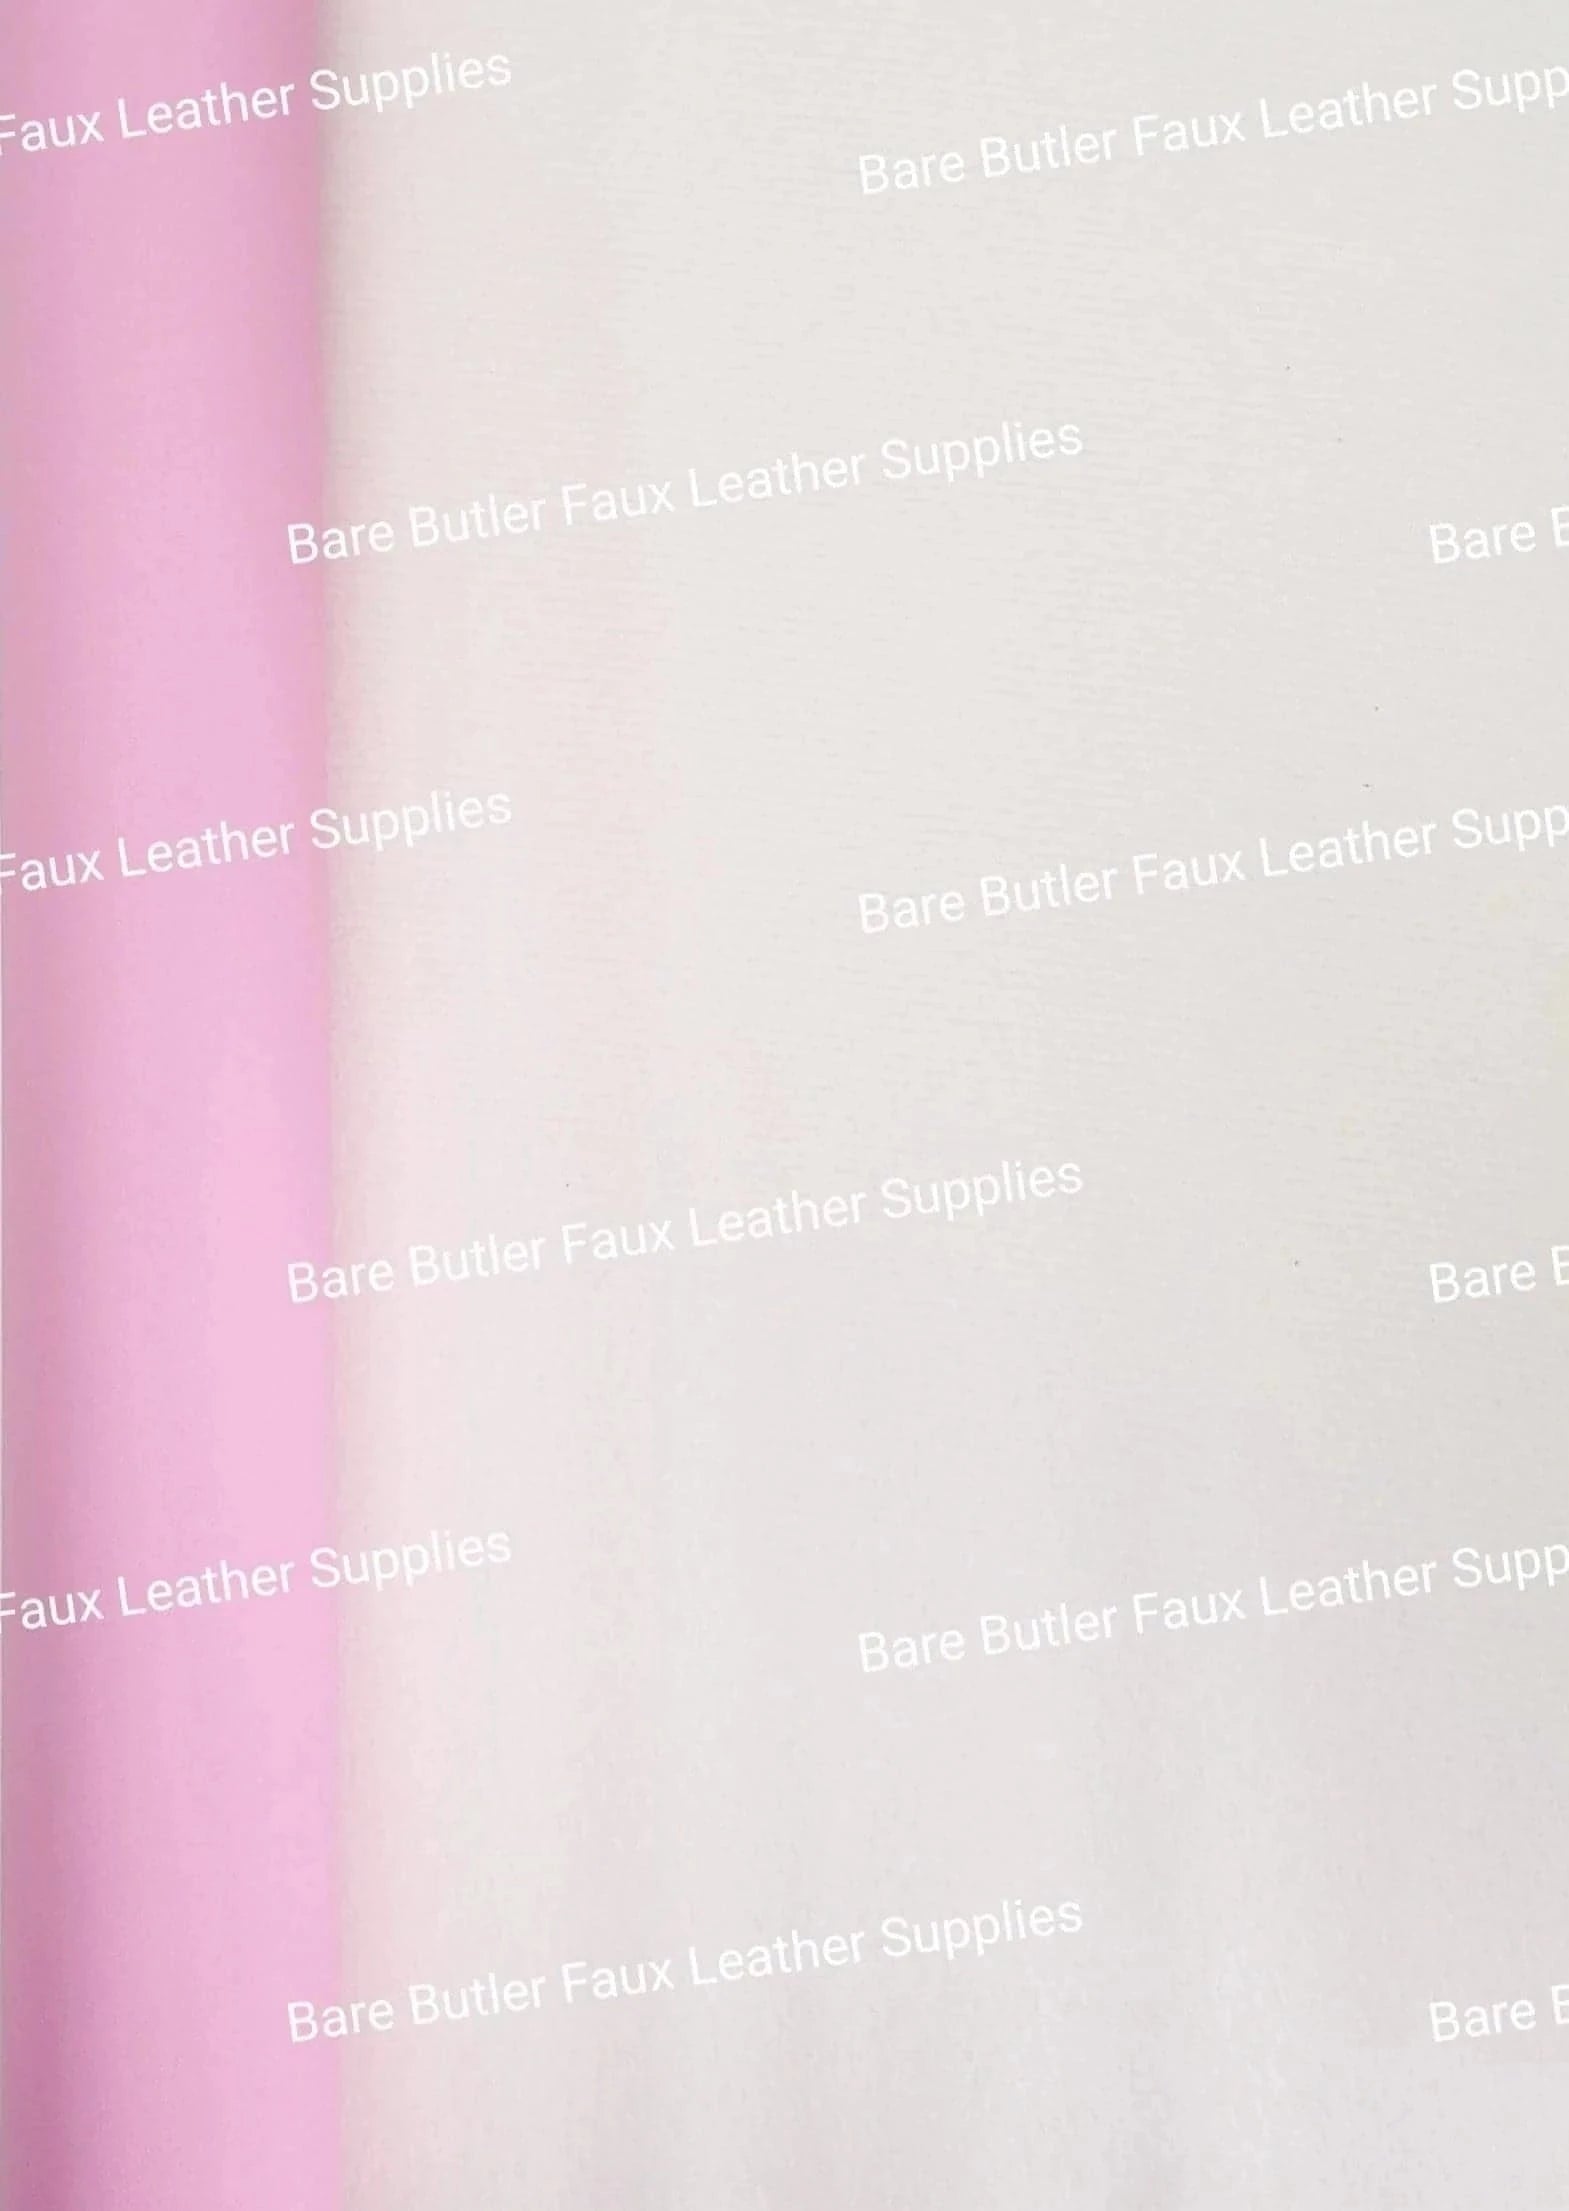 Roll - Pastels Pink - butter, Faux, Faux Leather, pastel, pastels, Roll, soft - Bare Butler Faux Leather Supplies 